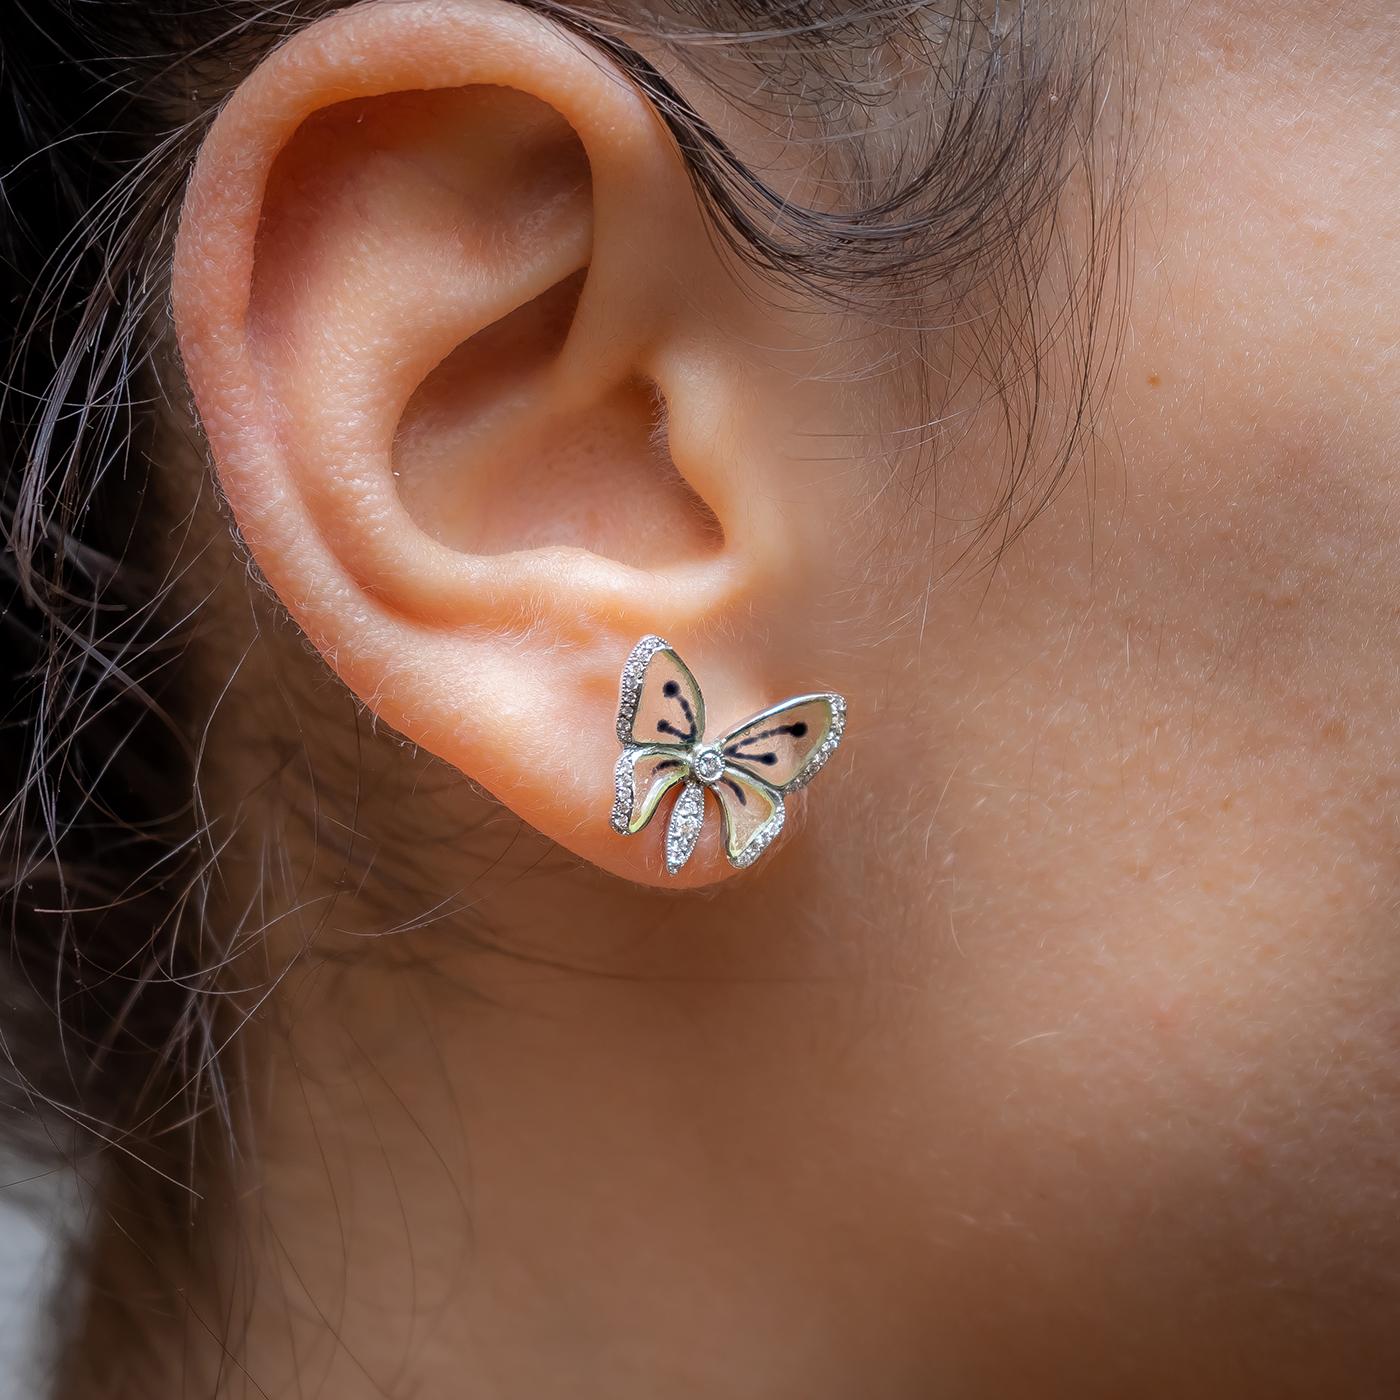 A pair of Moira blue butterfly earrings, with light blue, plique à jour, enamel wings, with black veins, with round brilliant-cut diamonds, set in the thorax, abdomen and wing edges, mounted in 18ct yellow gold, with alpha clip fittings.